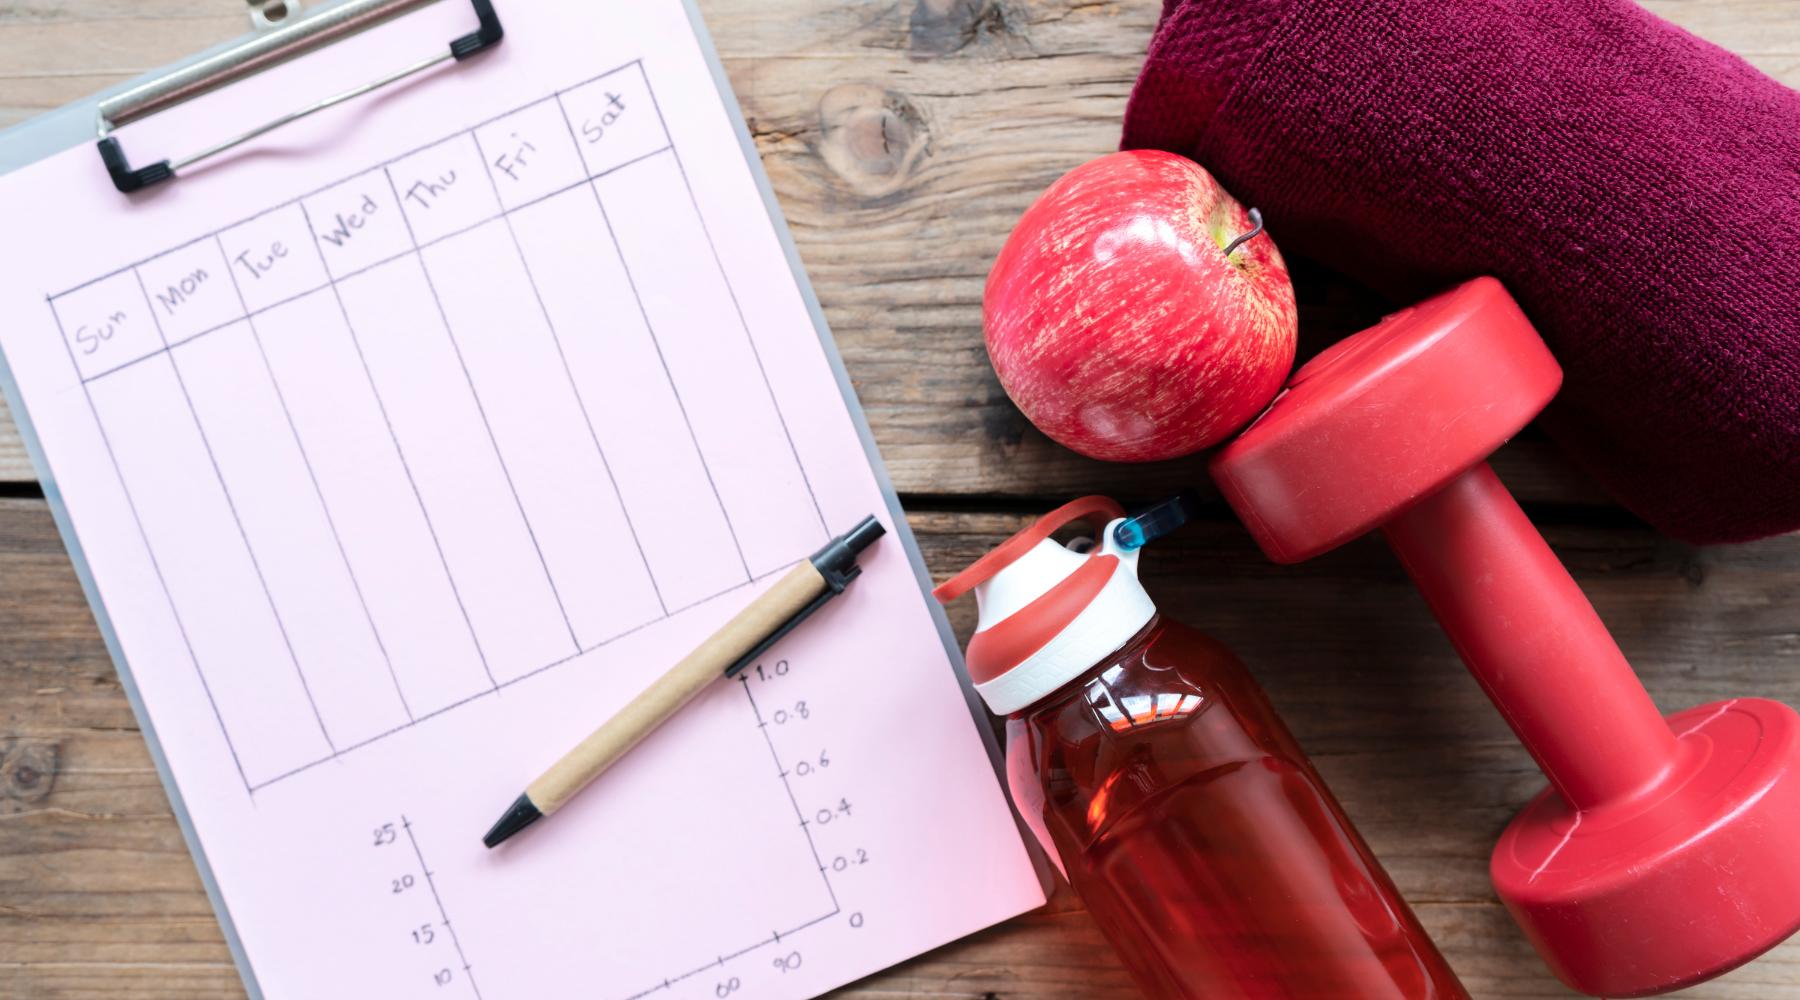 Exercise plan next to red apple, water bottle, dumbbell, and gym towel